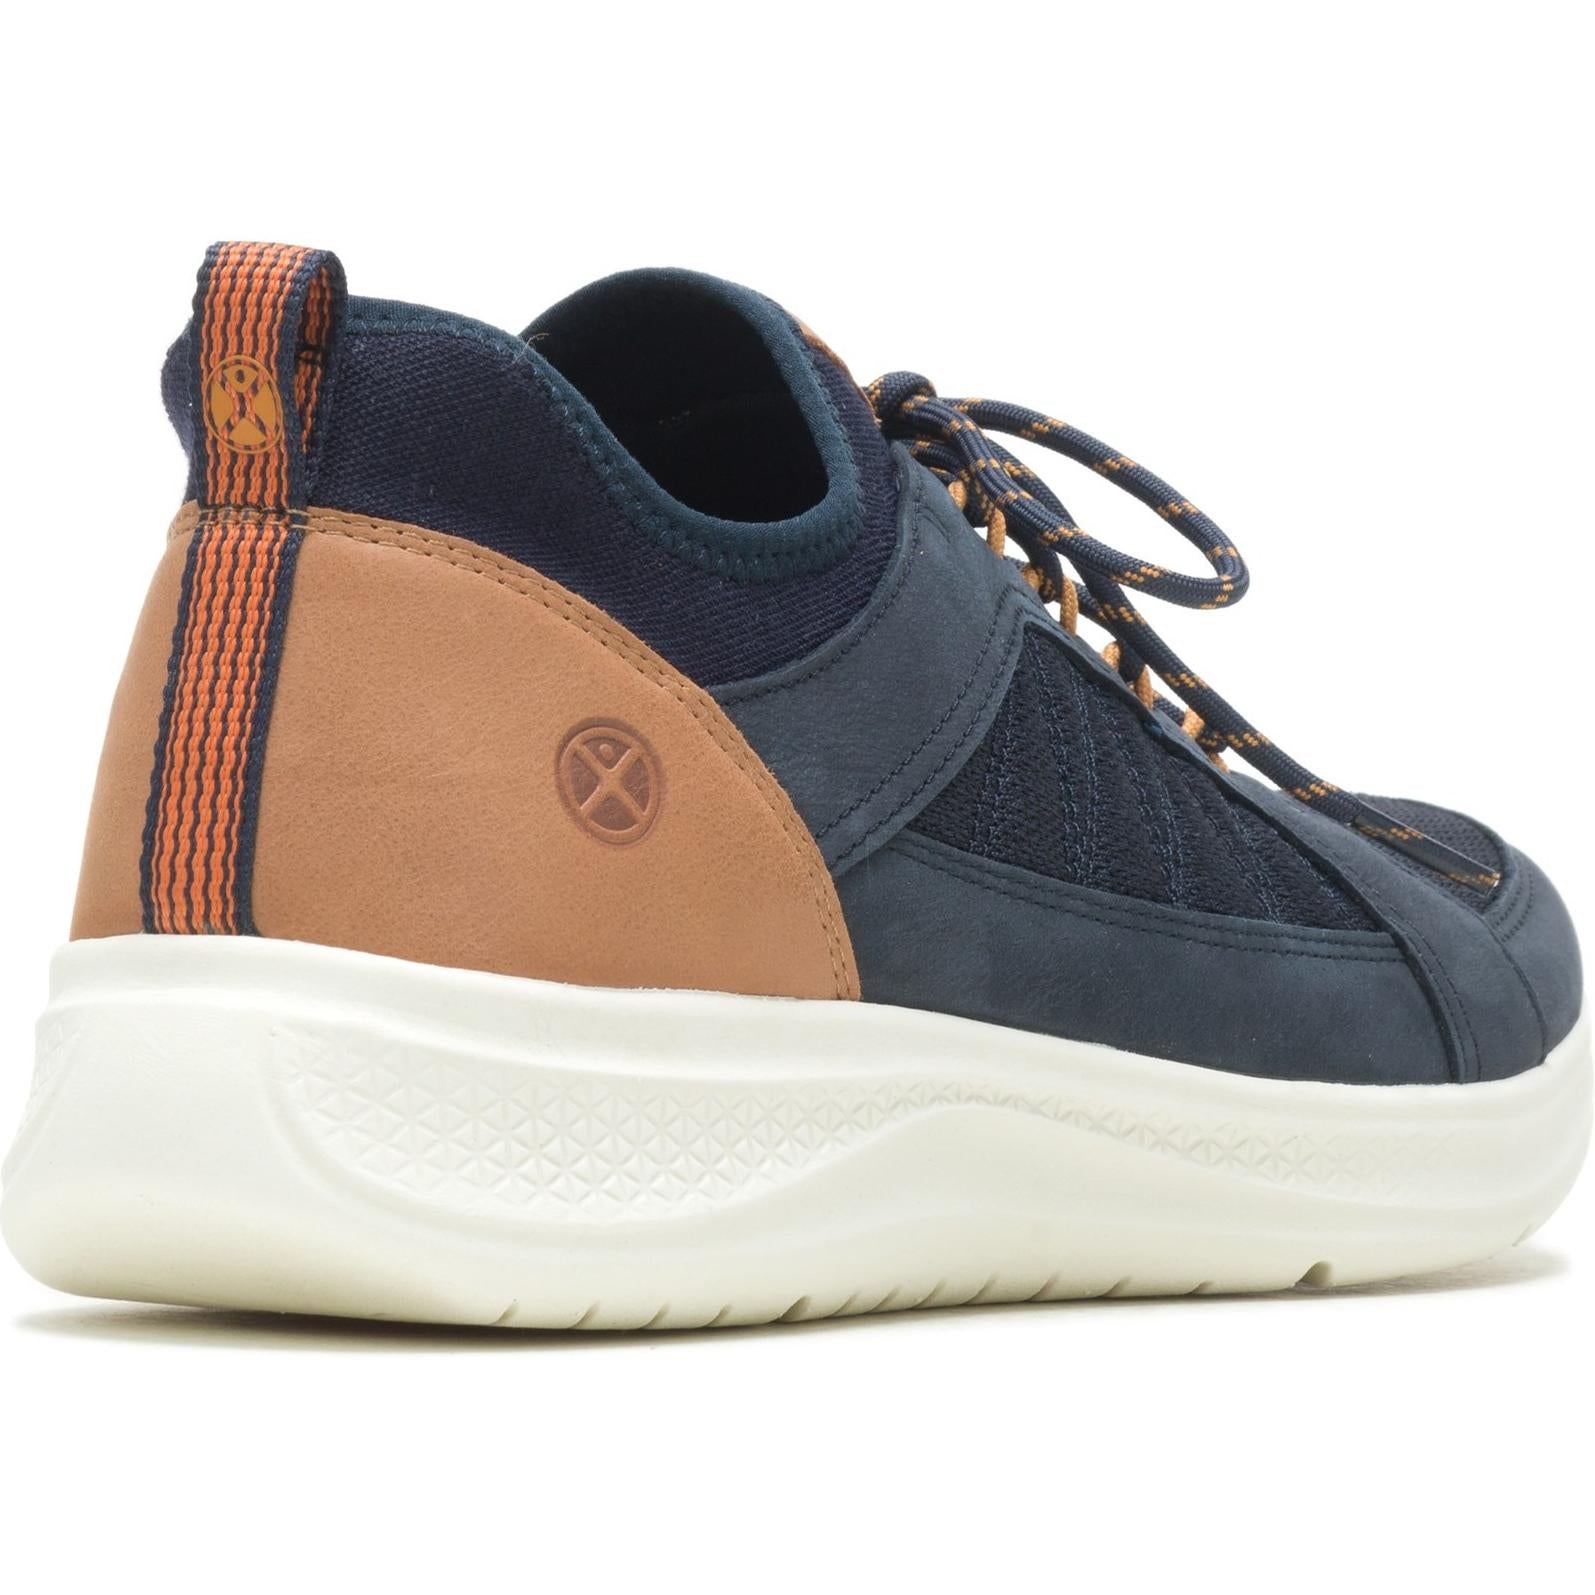 Hush Puppies Elevate Sneaker Trainers